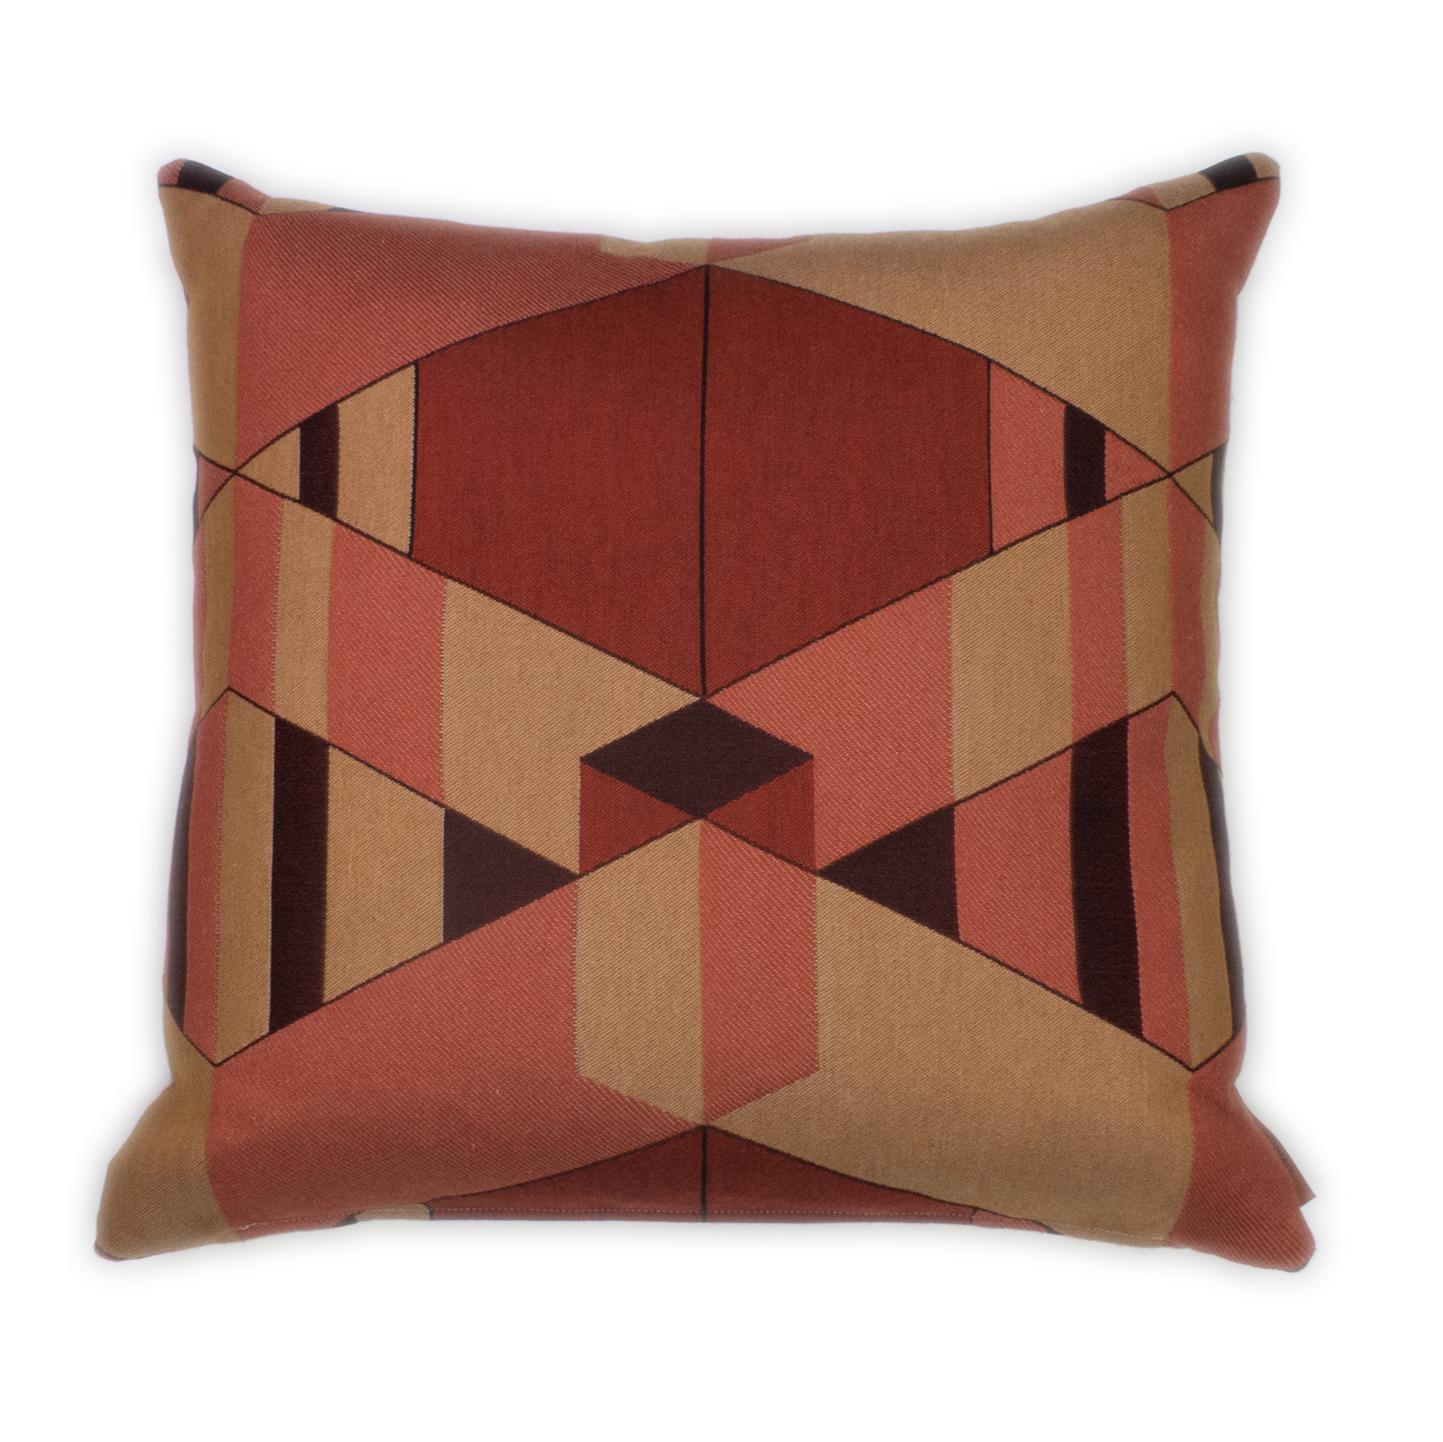 Modern Cushion / Pattern Pillow Absolute Coup De Foudre Red by Evolution21 For Sale